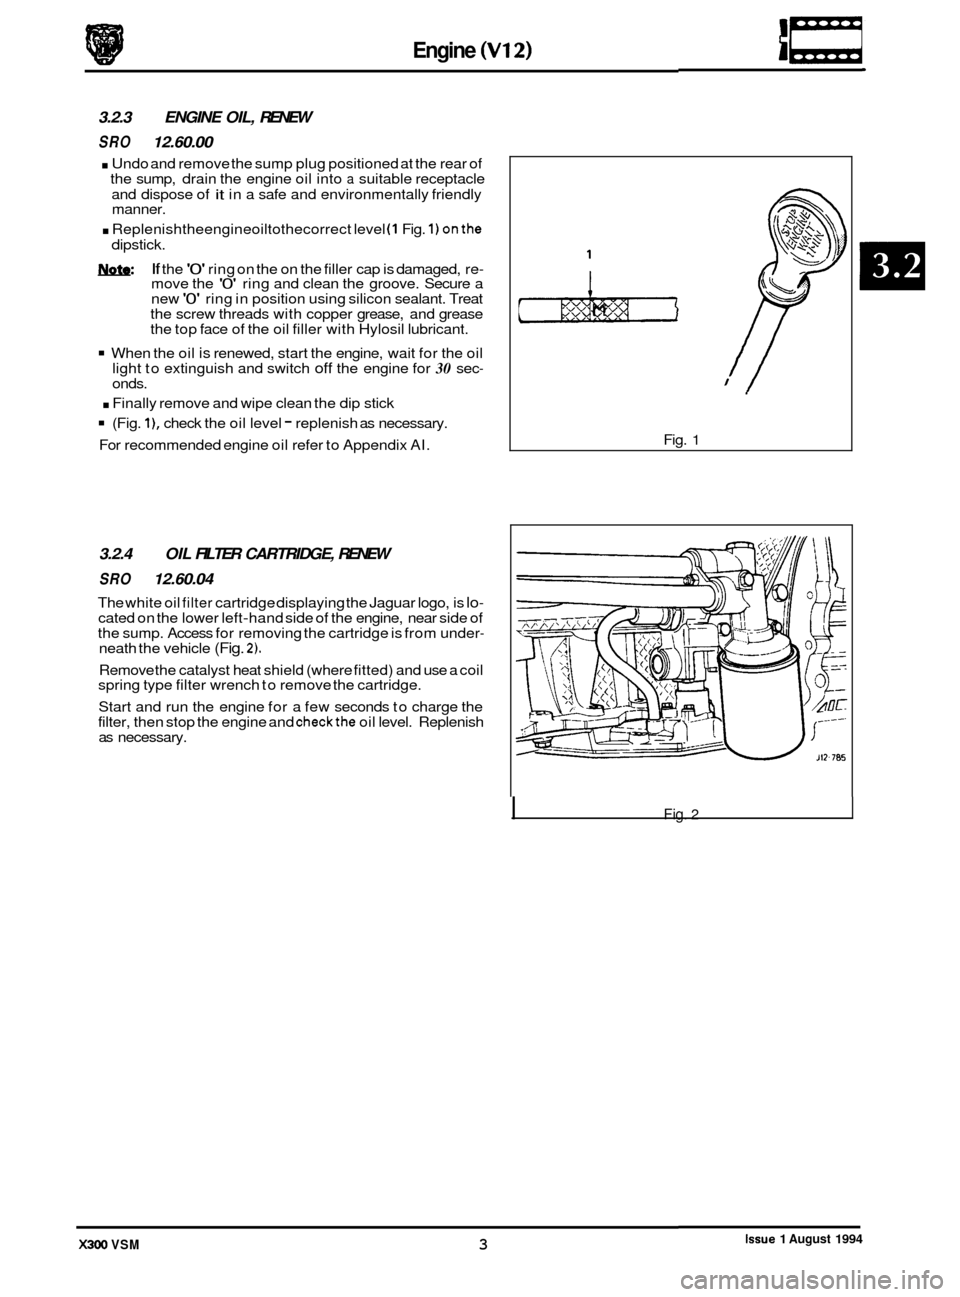 JAGUAR XJ6 1994 2.G User Guide Engine (V12) 
3.2.3 ENGINE OIL, RENEW 
SRO 12.60.00 
. Undo  and remove the sump  plug positioned  at the  rear  of 
the  sump,  drain the  engine oil into a suitable  receptacle 
and  dispose  of 
it